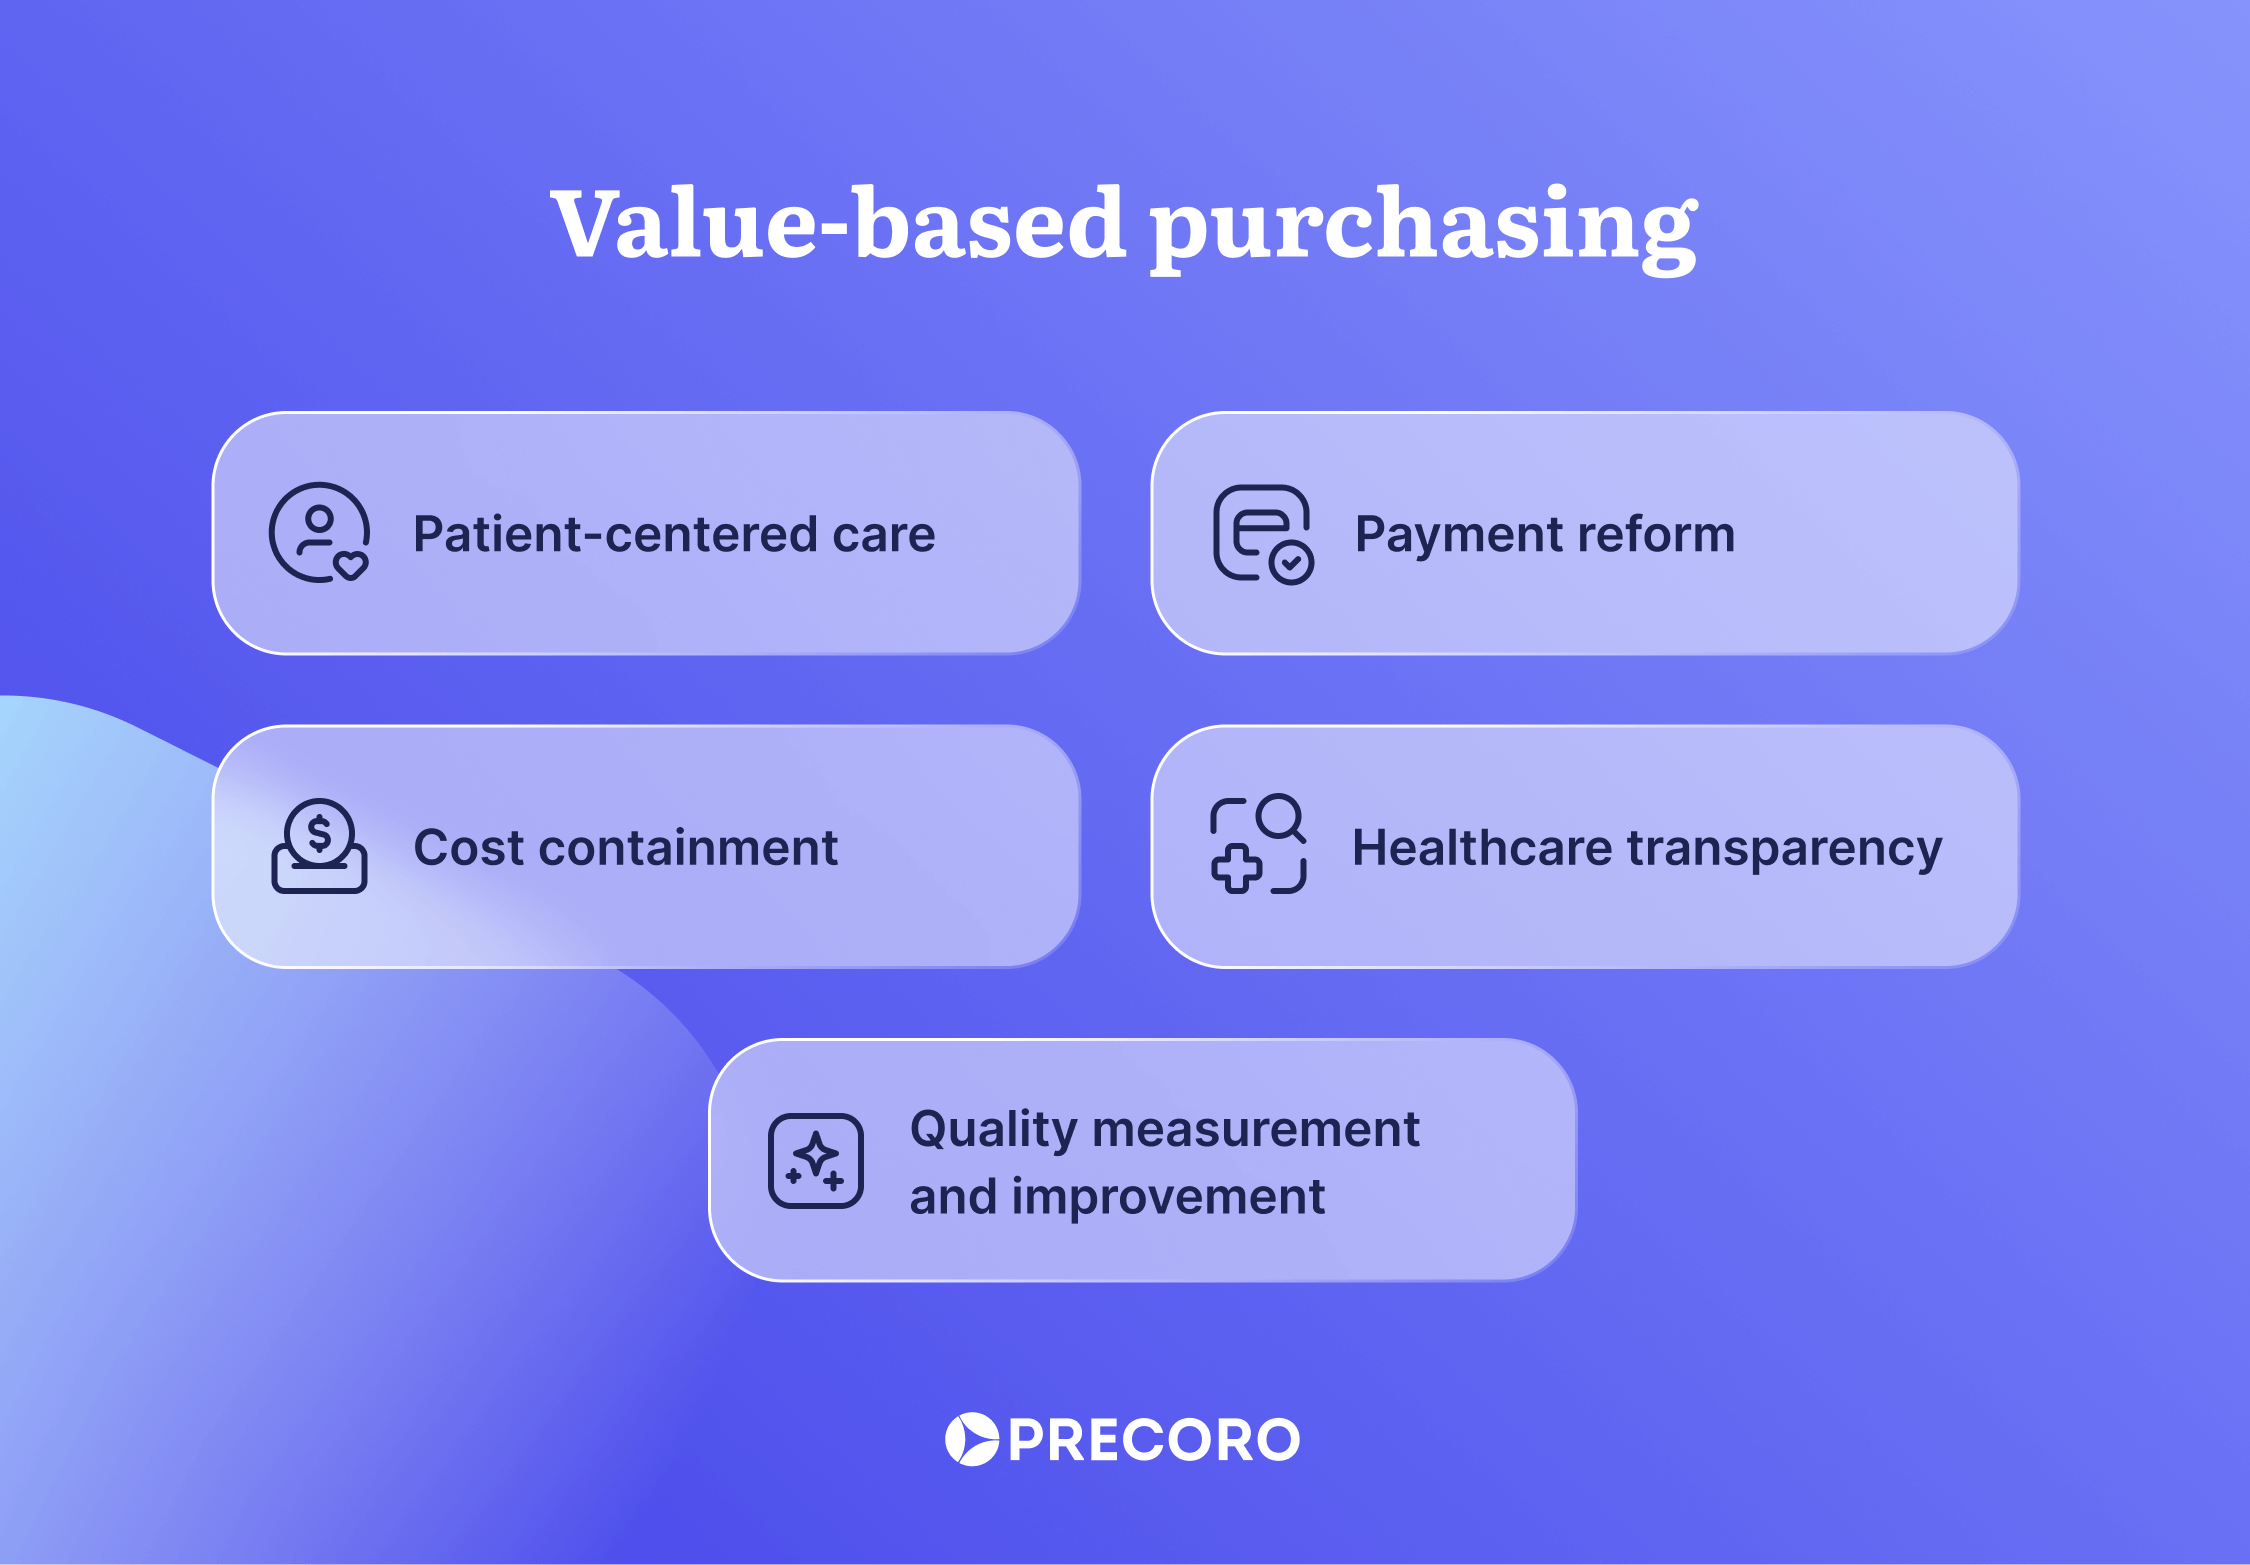 key aspects of value-based purchasing